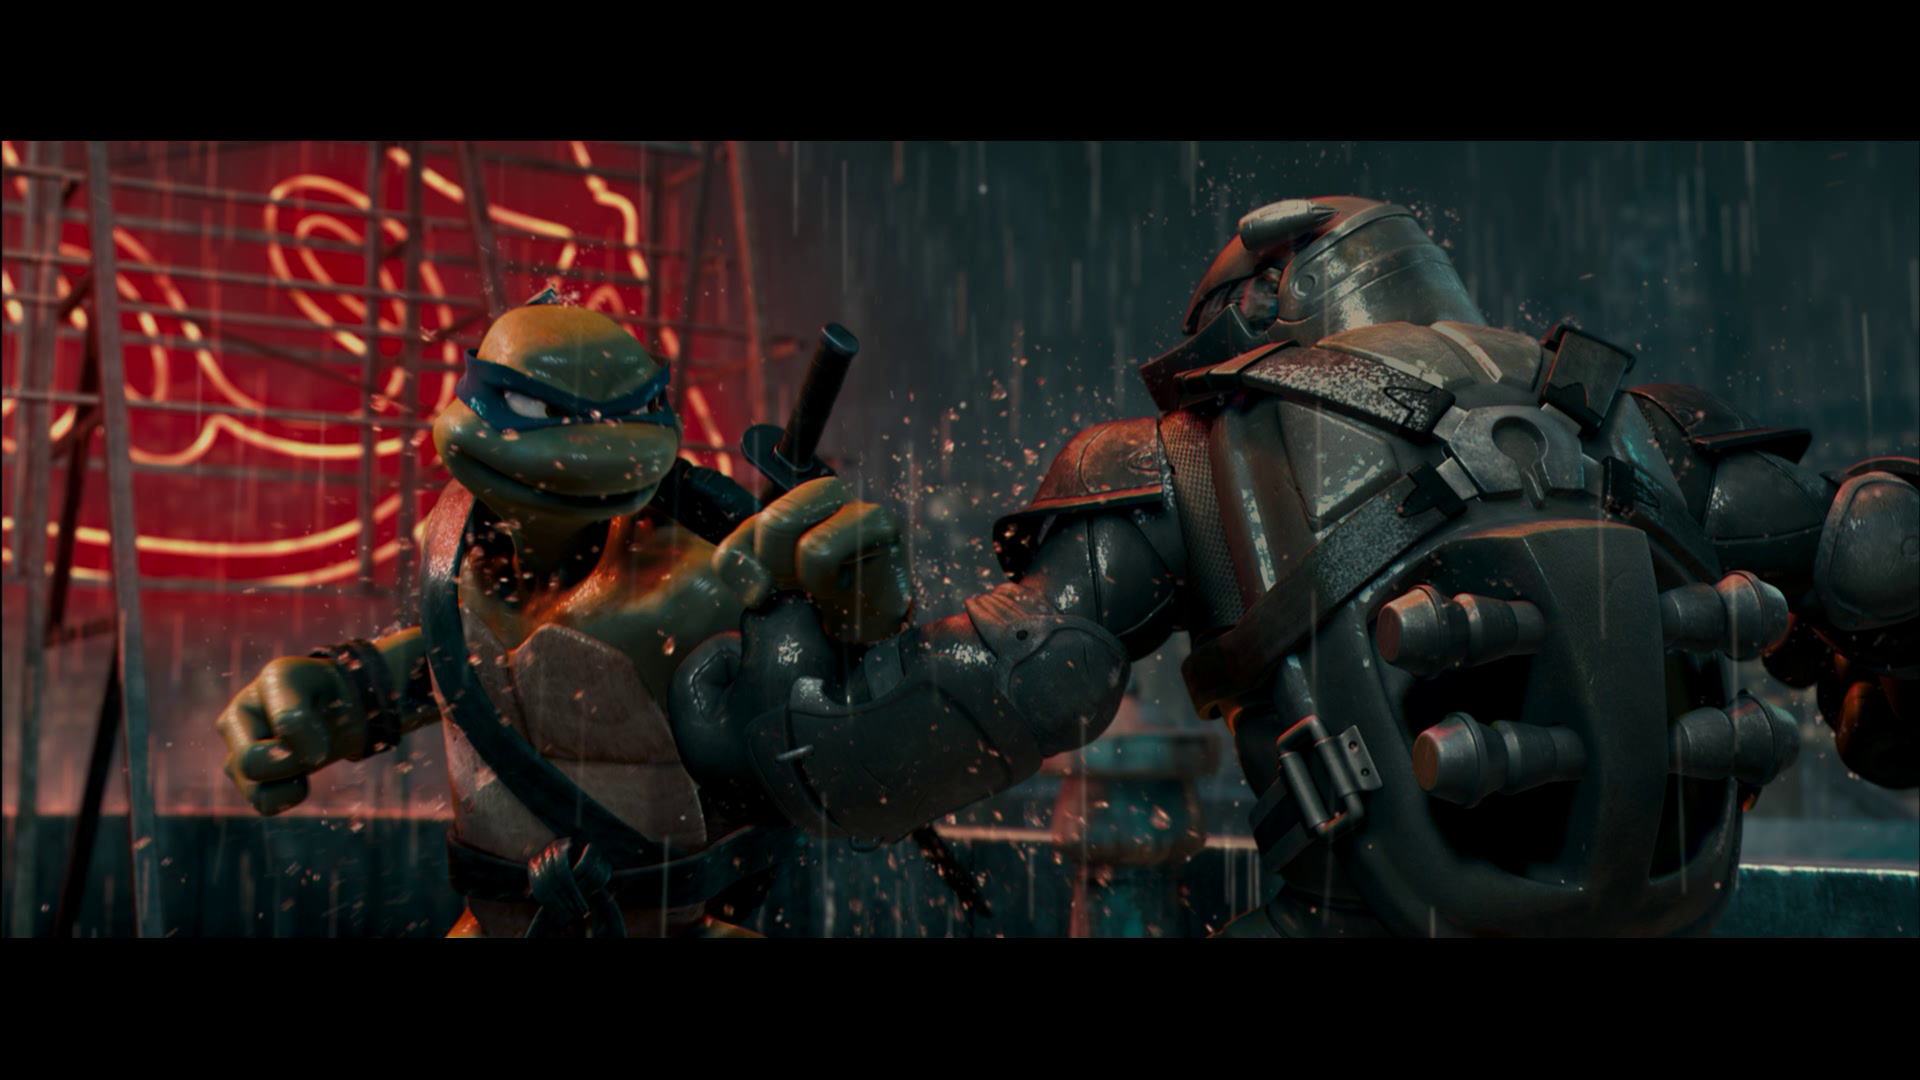 Review: TMNT (2007)